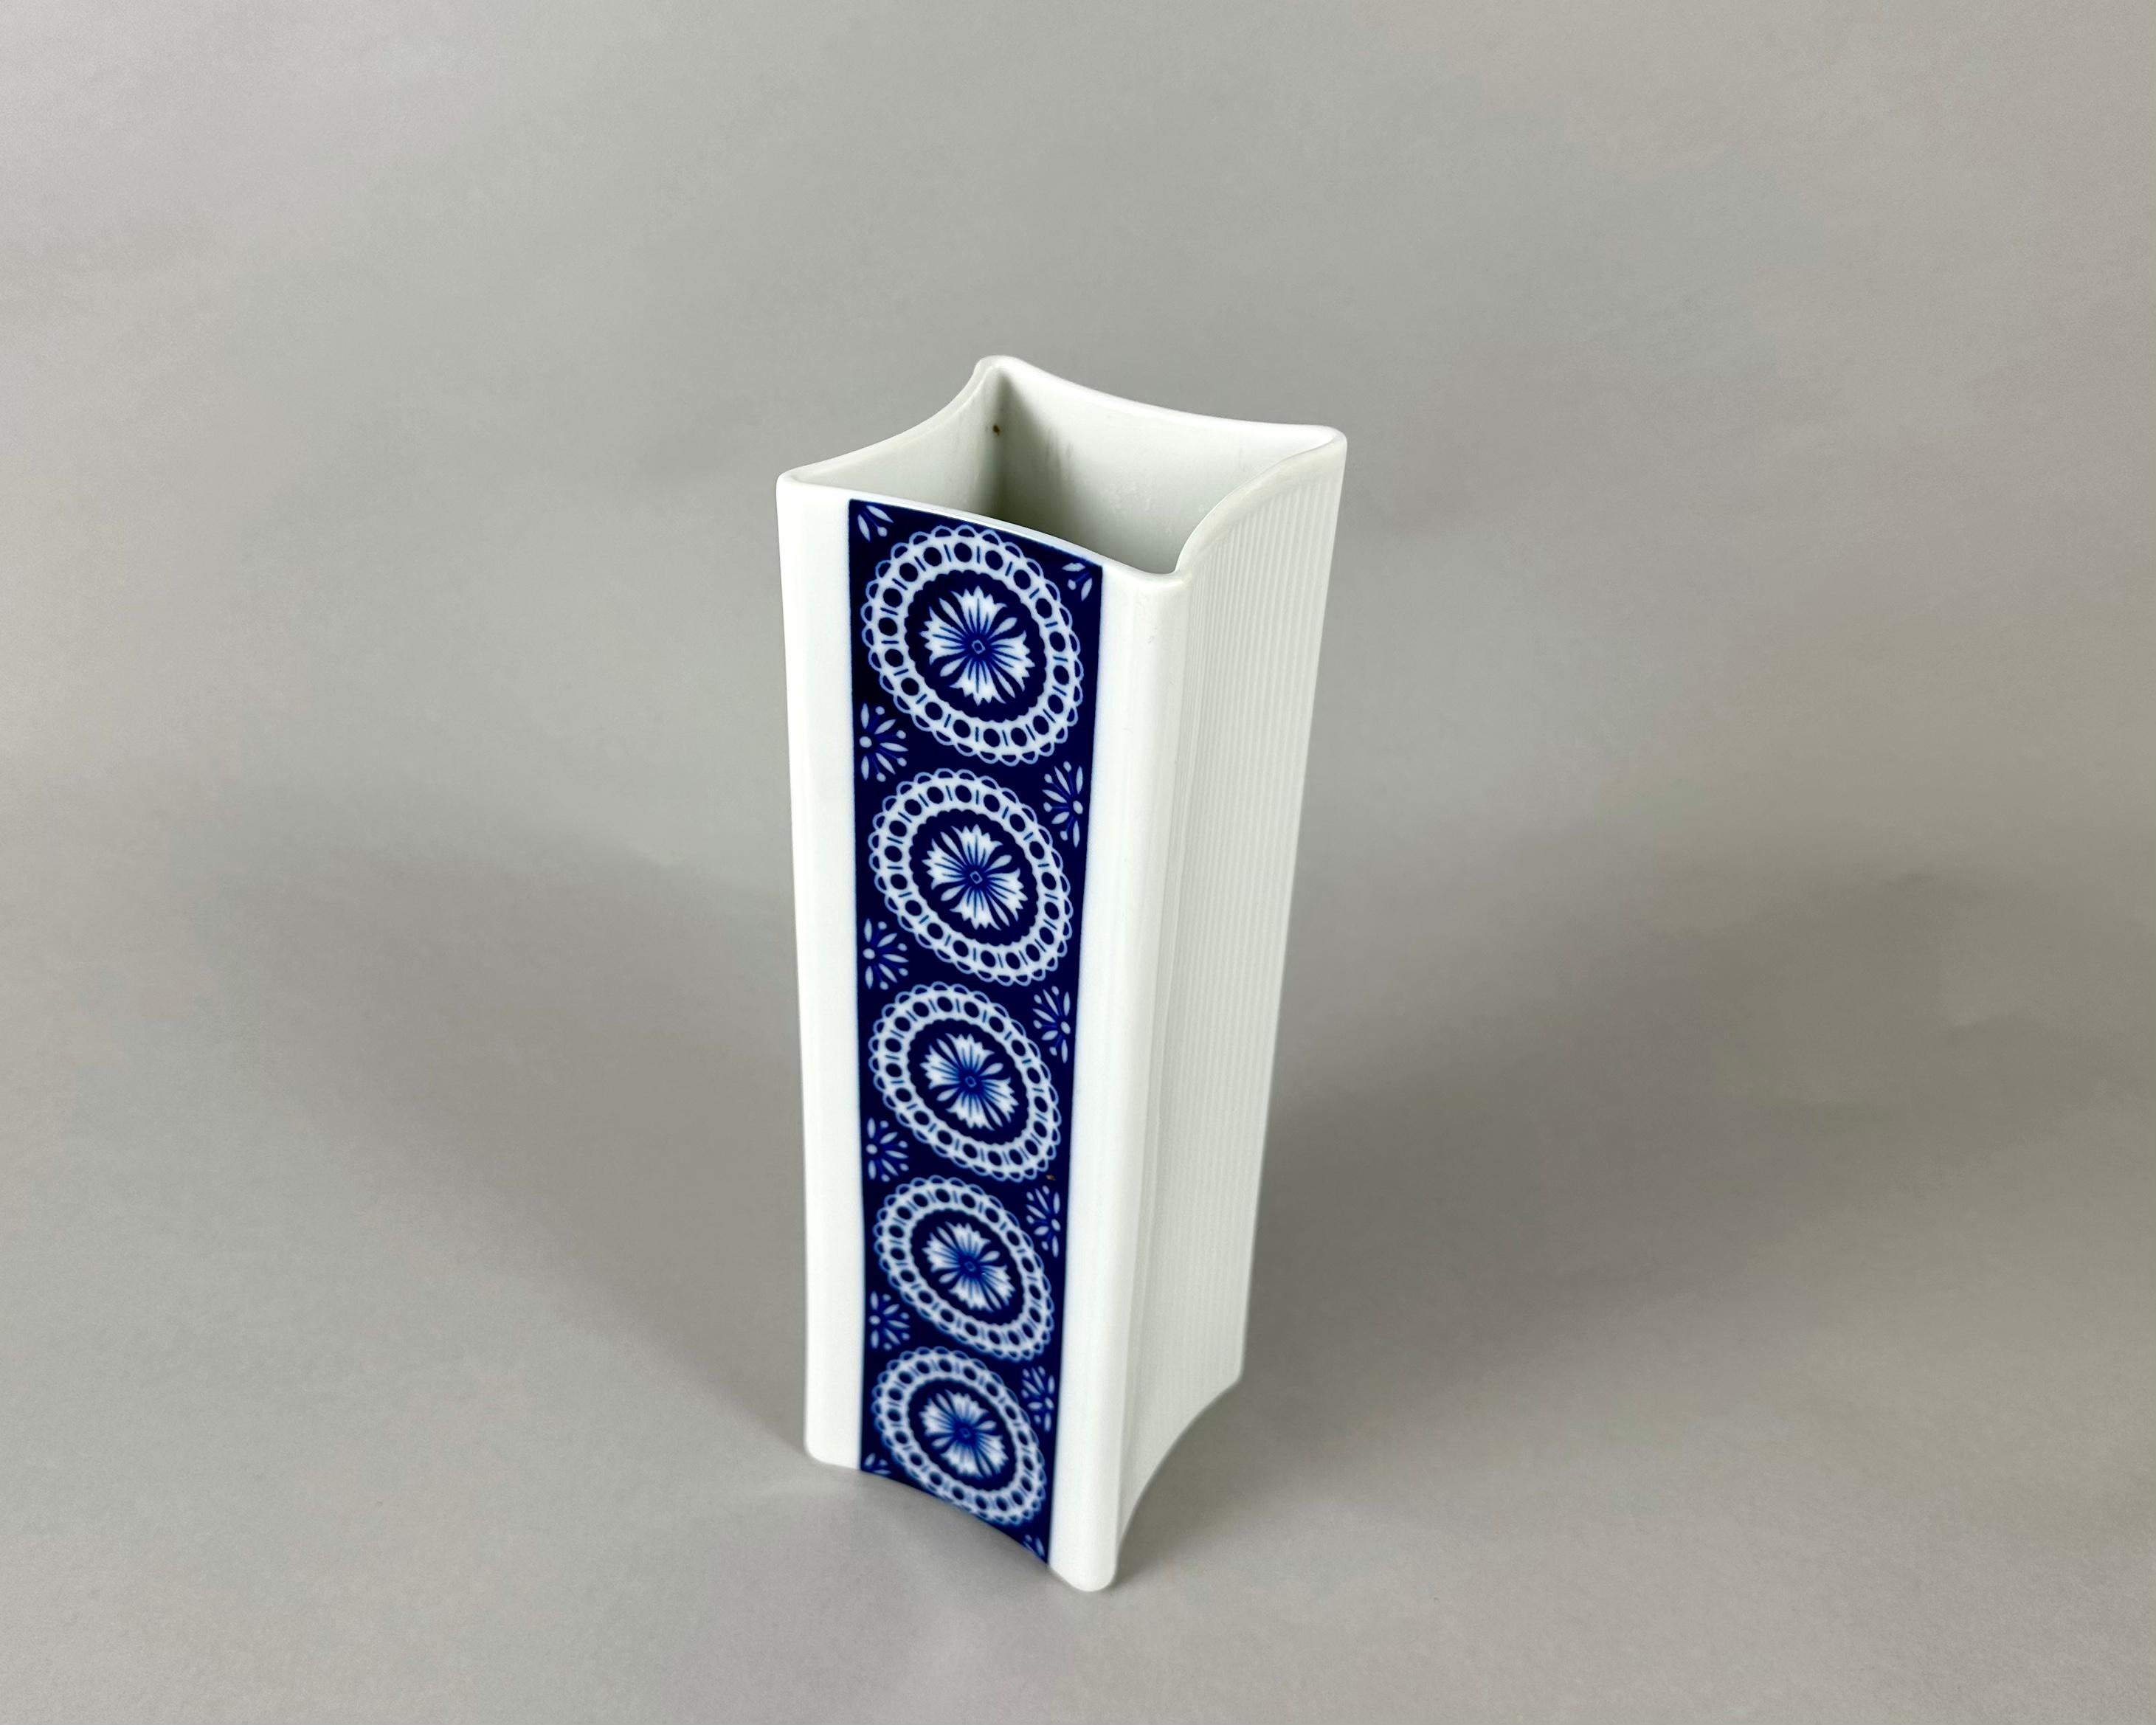 Vintage Porcelain Vase with Blue pattern by Schirnding Bavaria Germany.

The vase is made of hand-painted porcelain in Germany in the 1970s.

It has a rectangular shape and ribbed sides which gives it a certain stylishness.

The hand painting gives